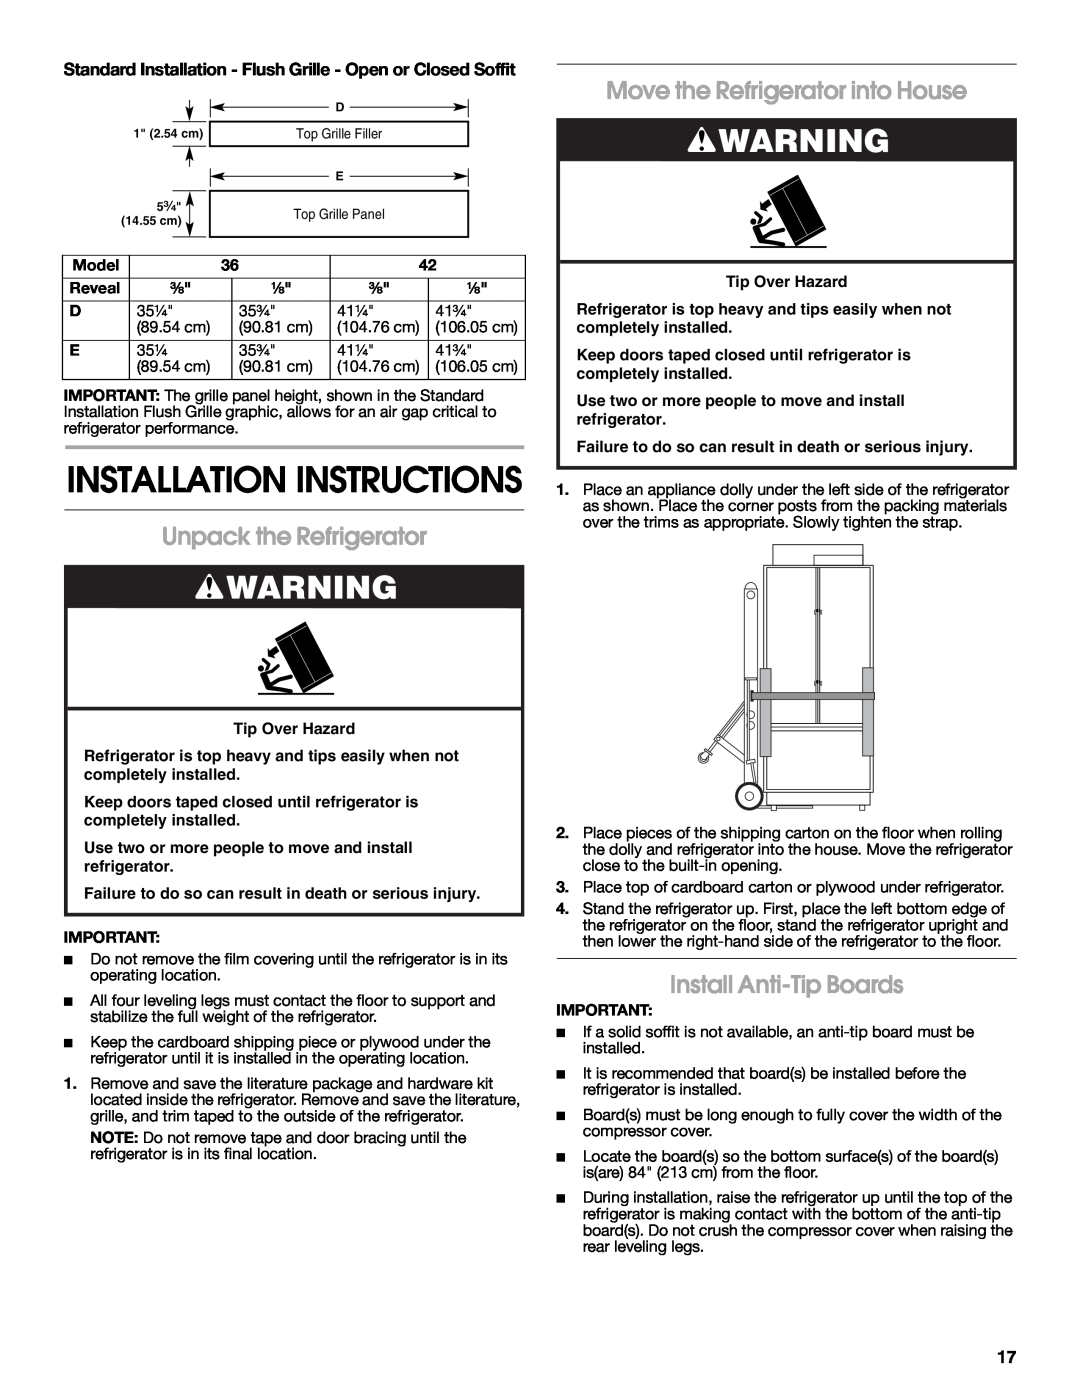 Jenn-Air W10379137A manual Unpack the Refrigerator, Move the Refrigerator into House, Install Anti-TipBoards 